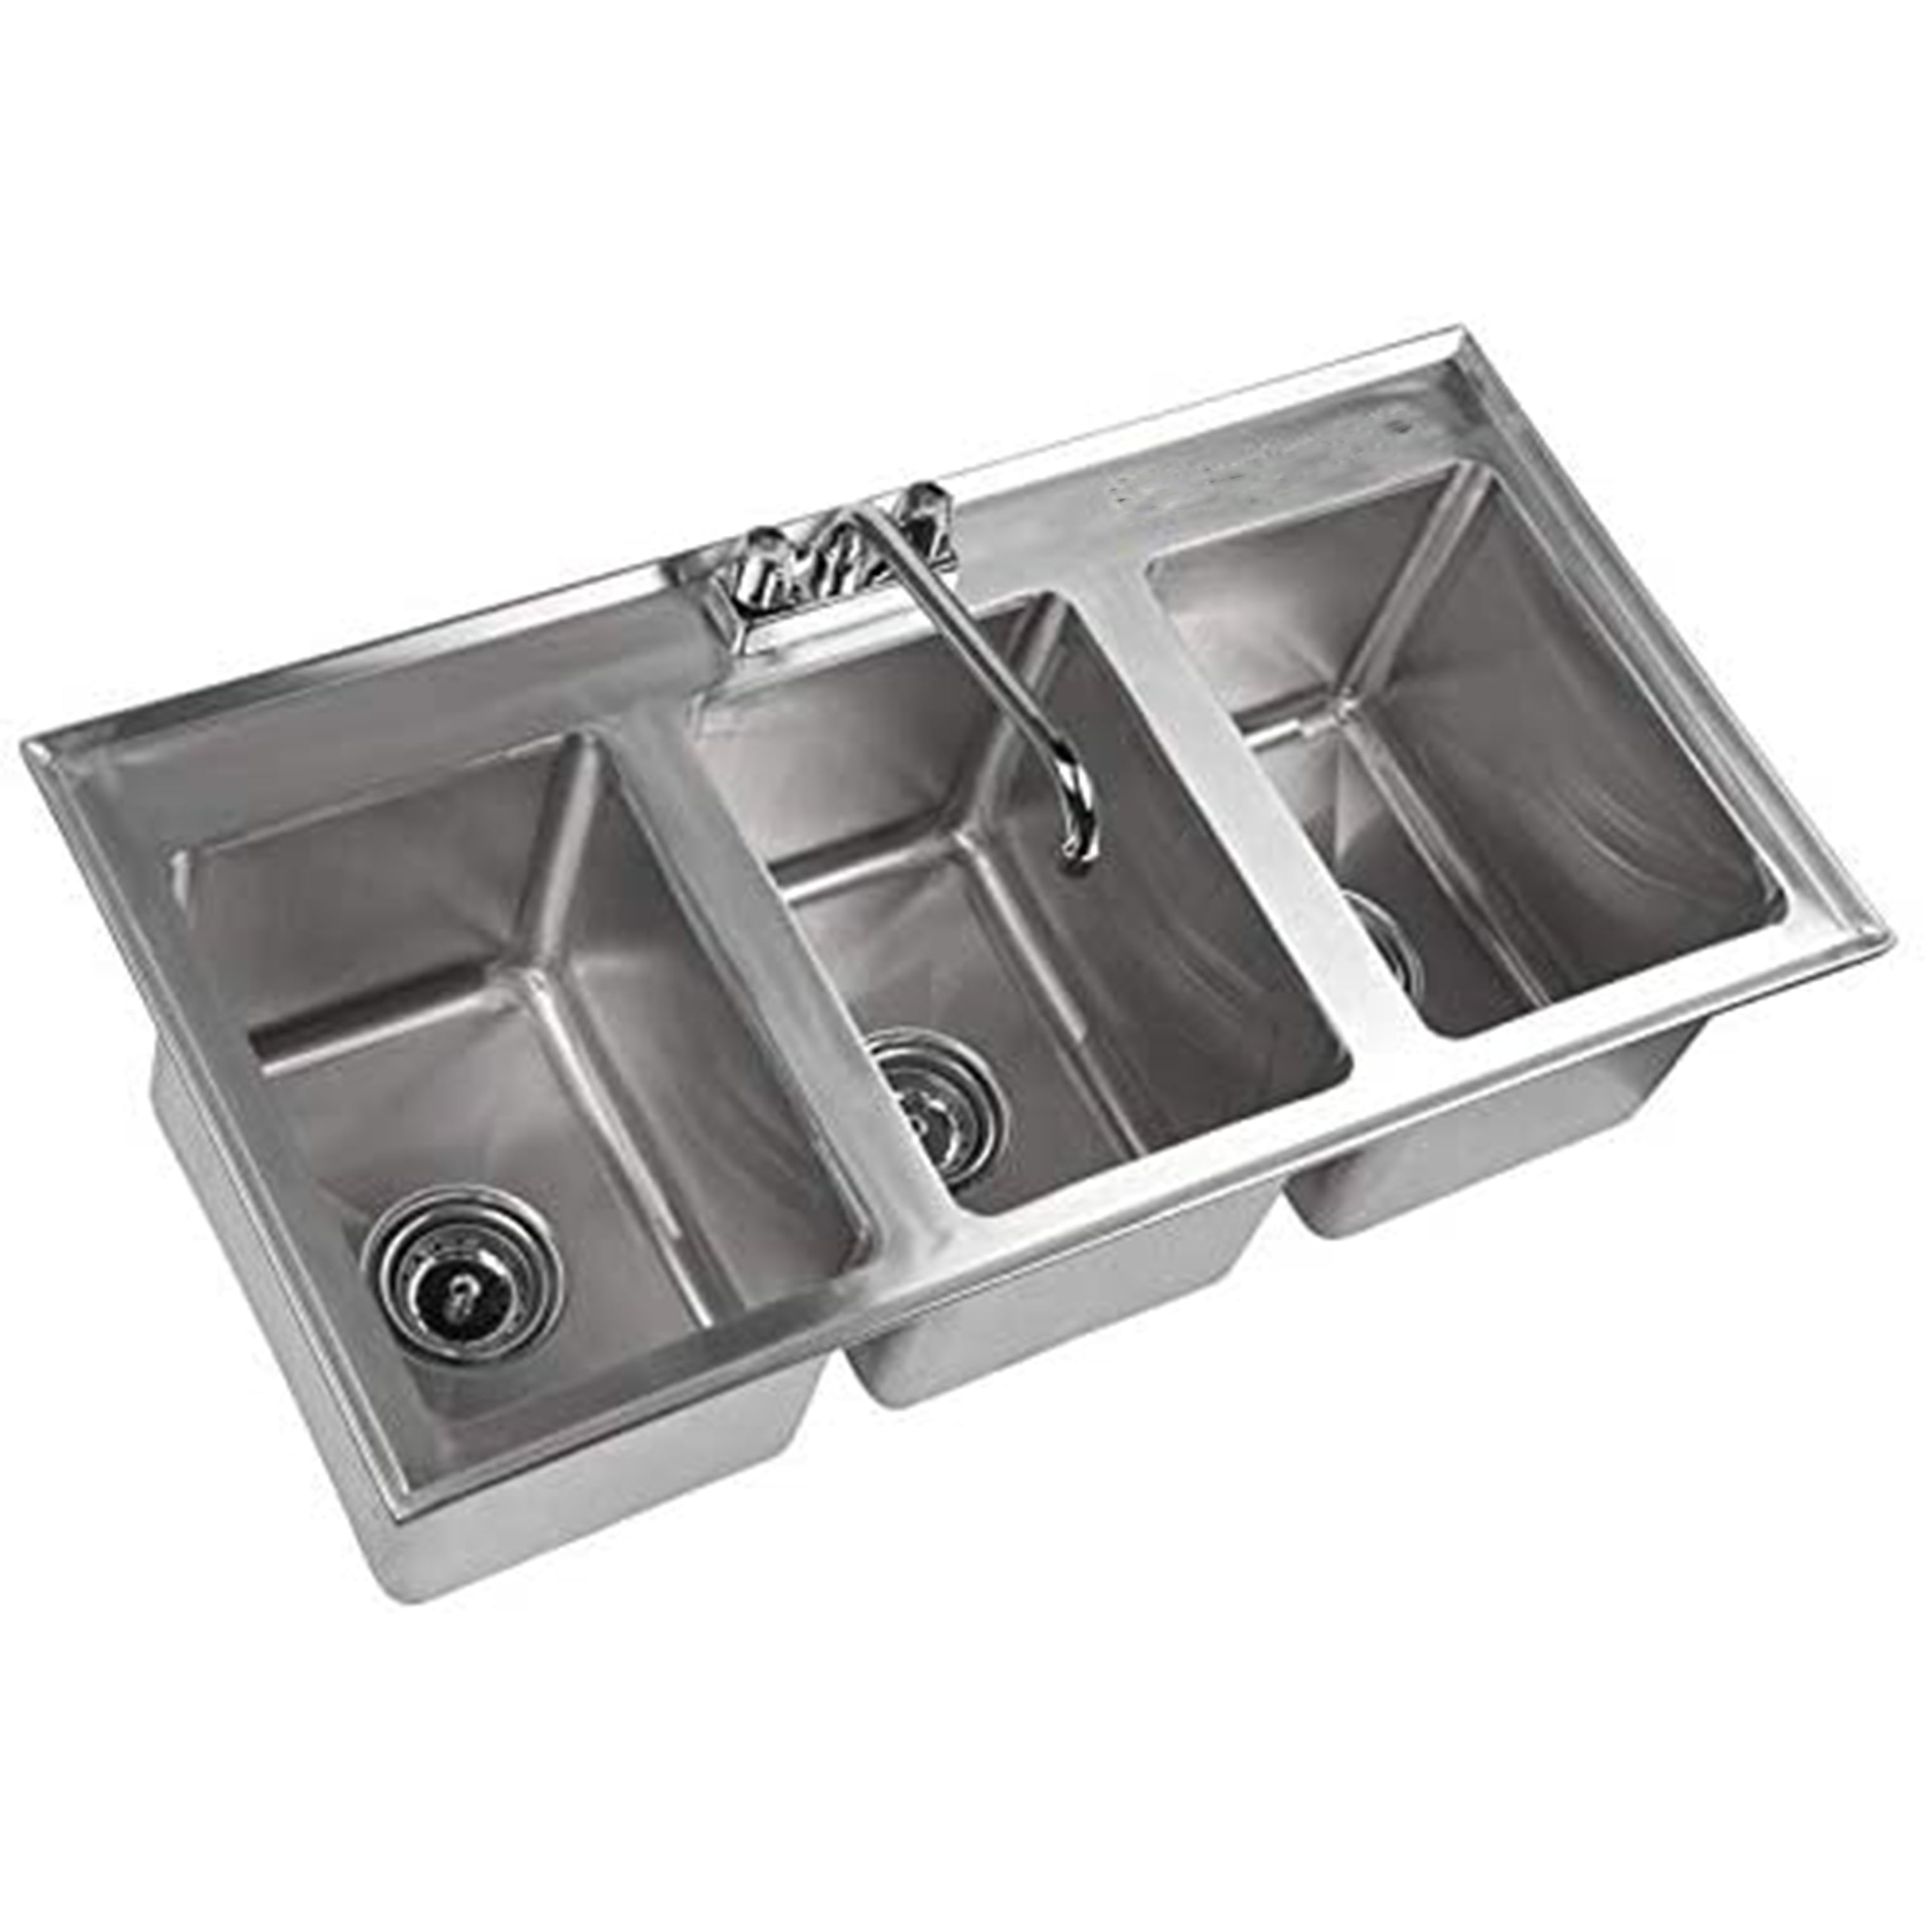 3 Compartment Stainless Steel Sinks